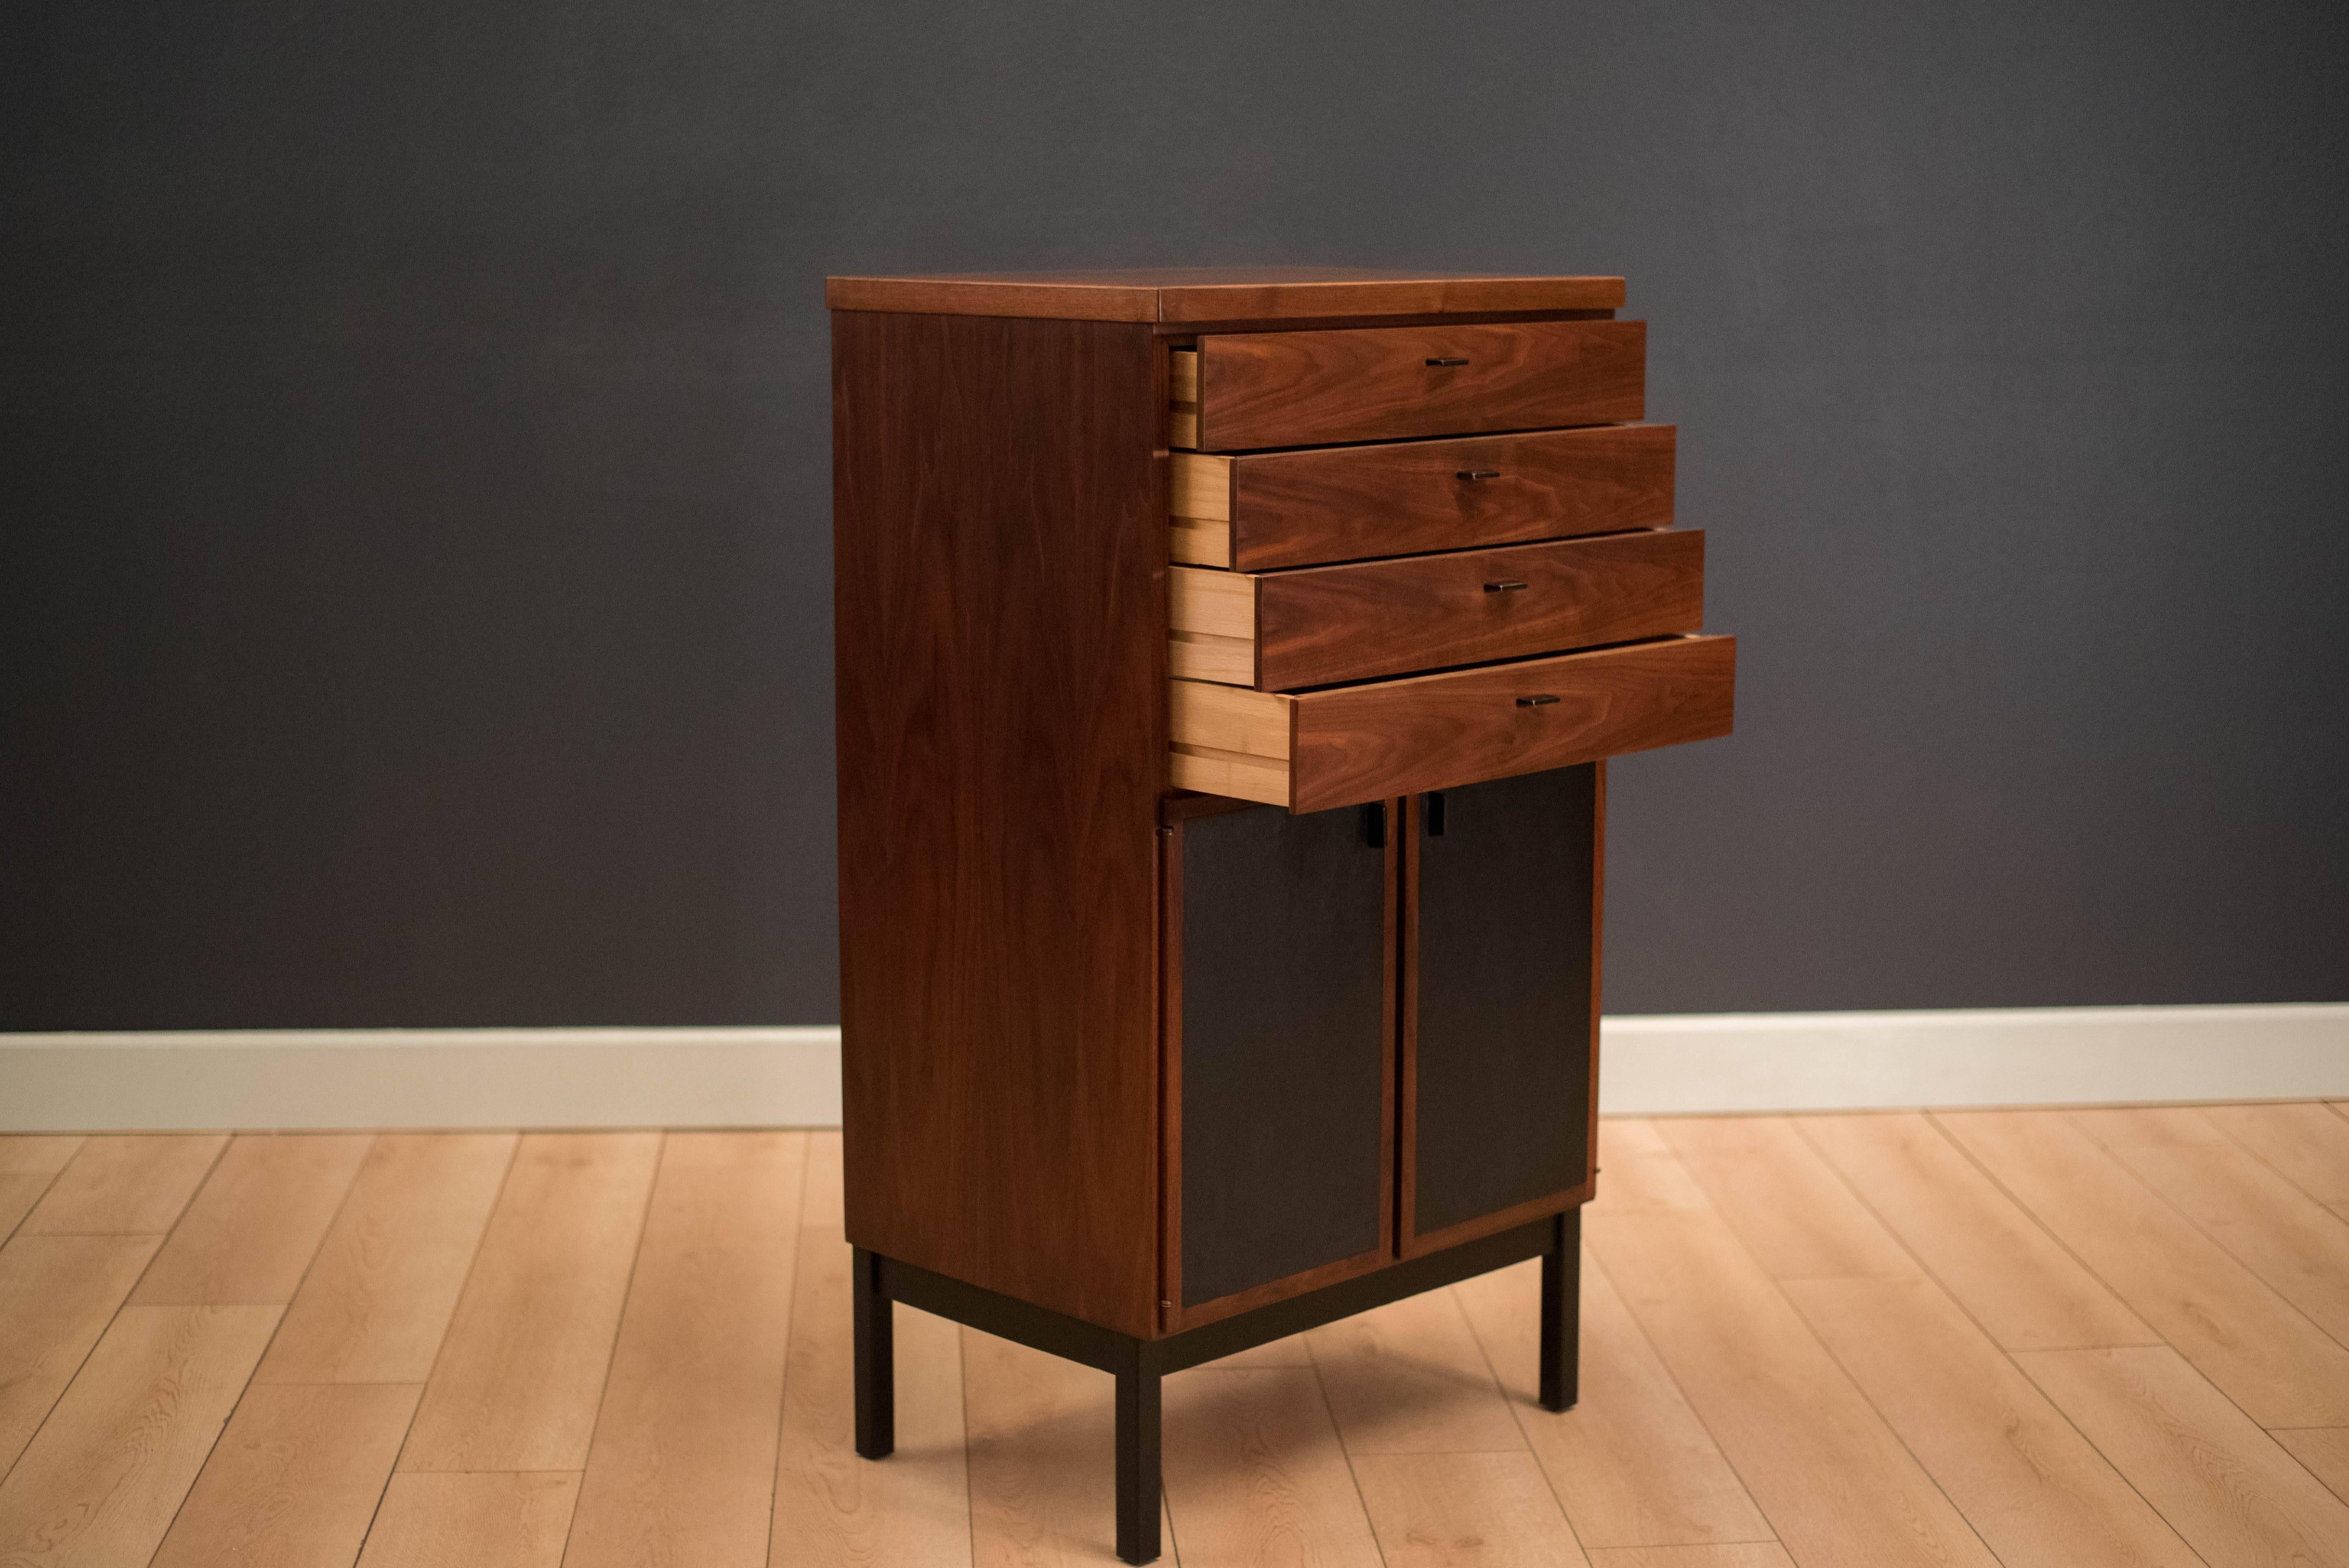 Mid-century modern tall dresser in walnut. This piece includes four dovetailed drawers with black metal pulls. Swing out doors are lined with black vinyl that reveal open storage space with one adjustable divider. Matching low dresser available in